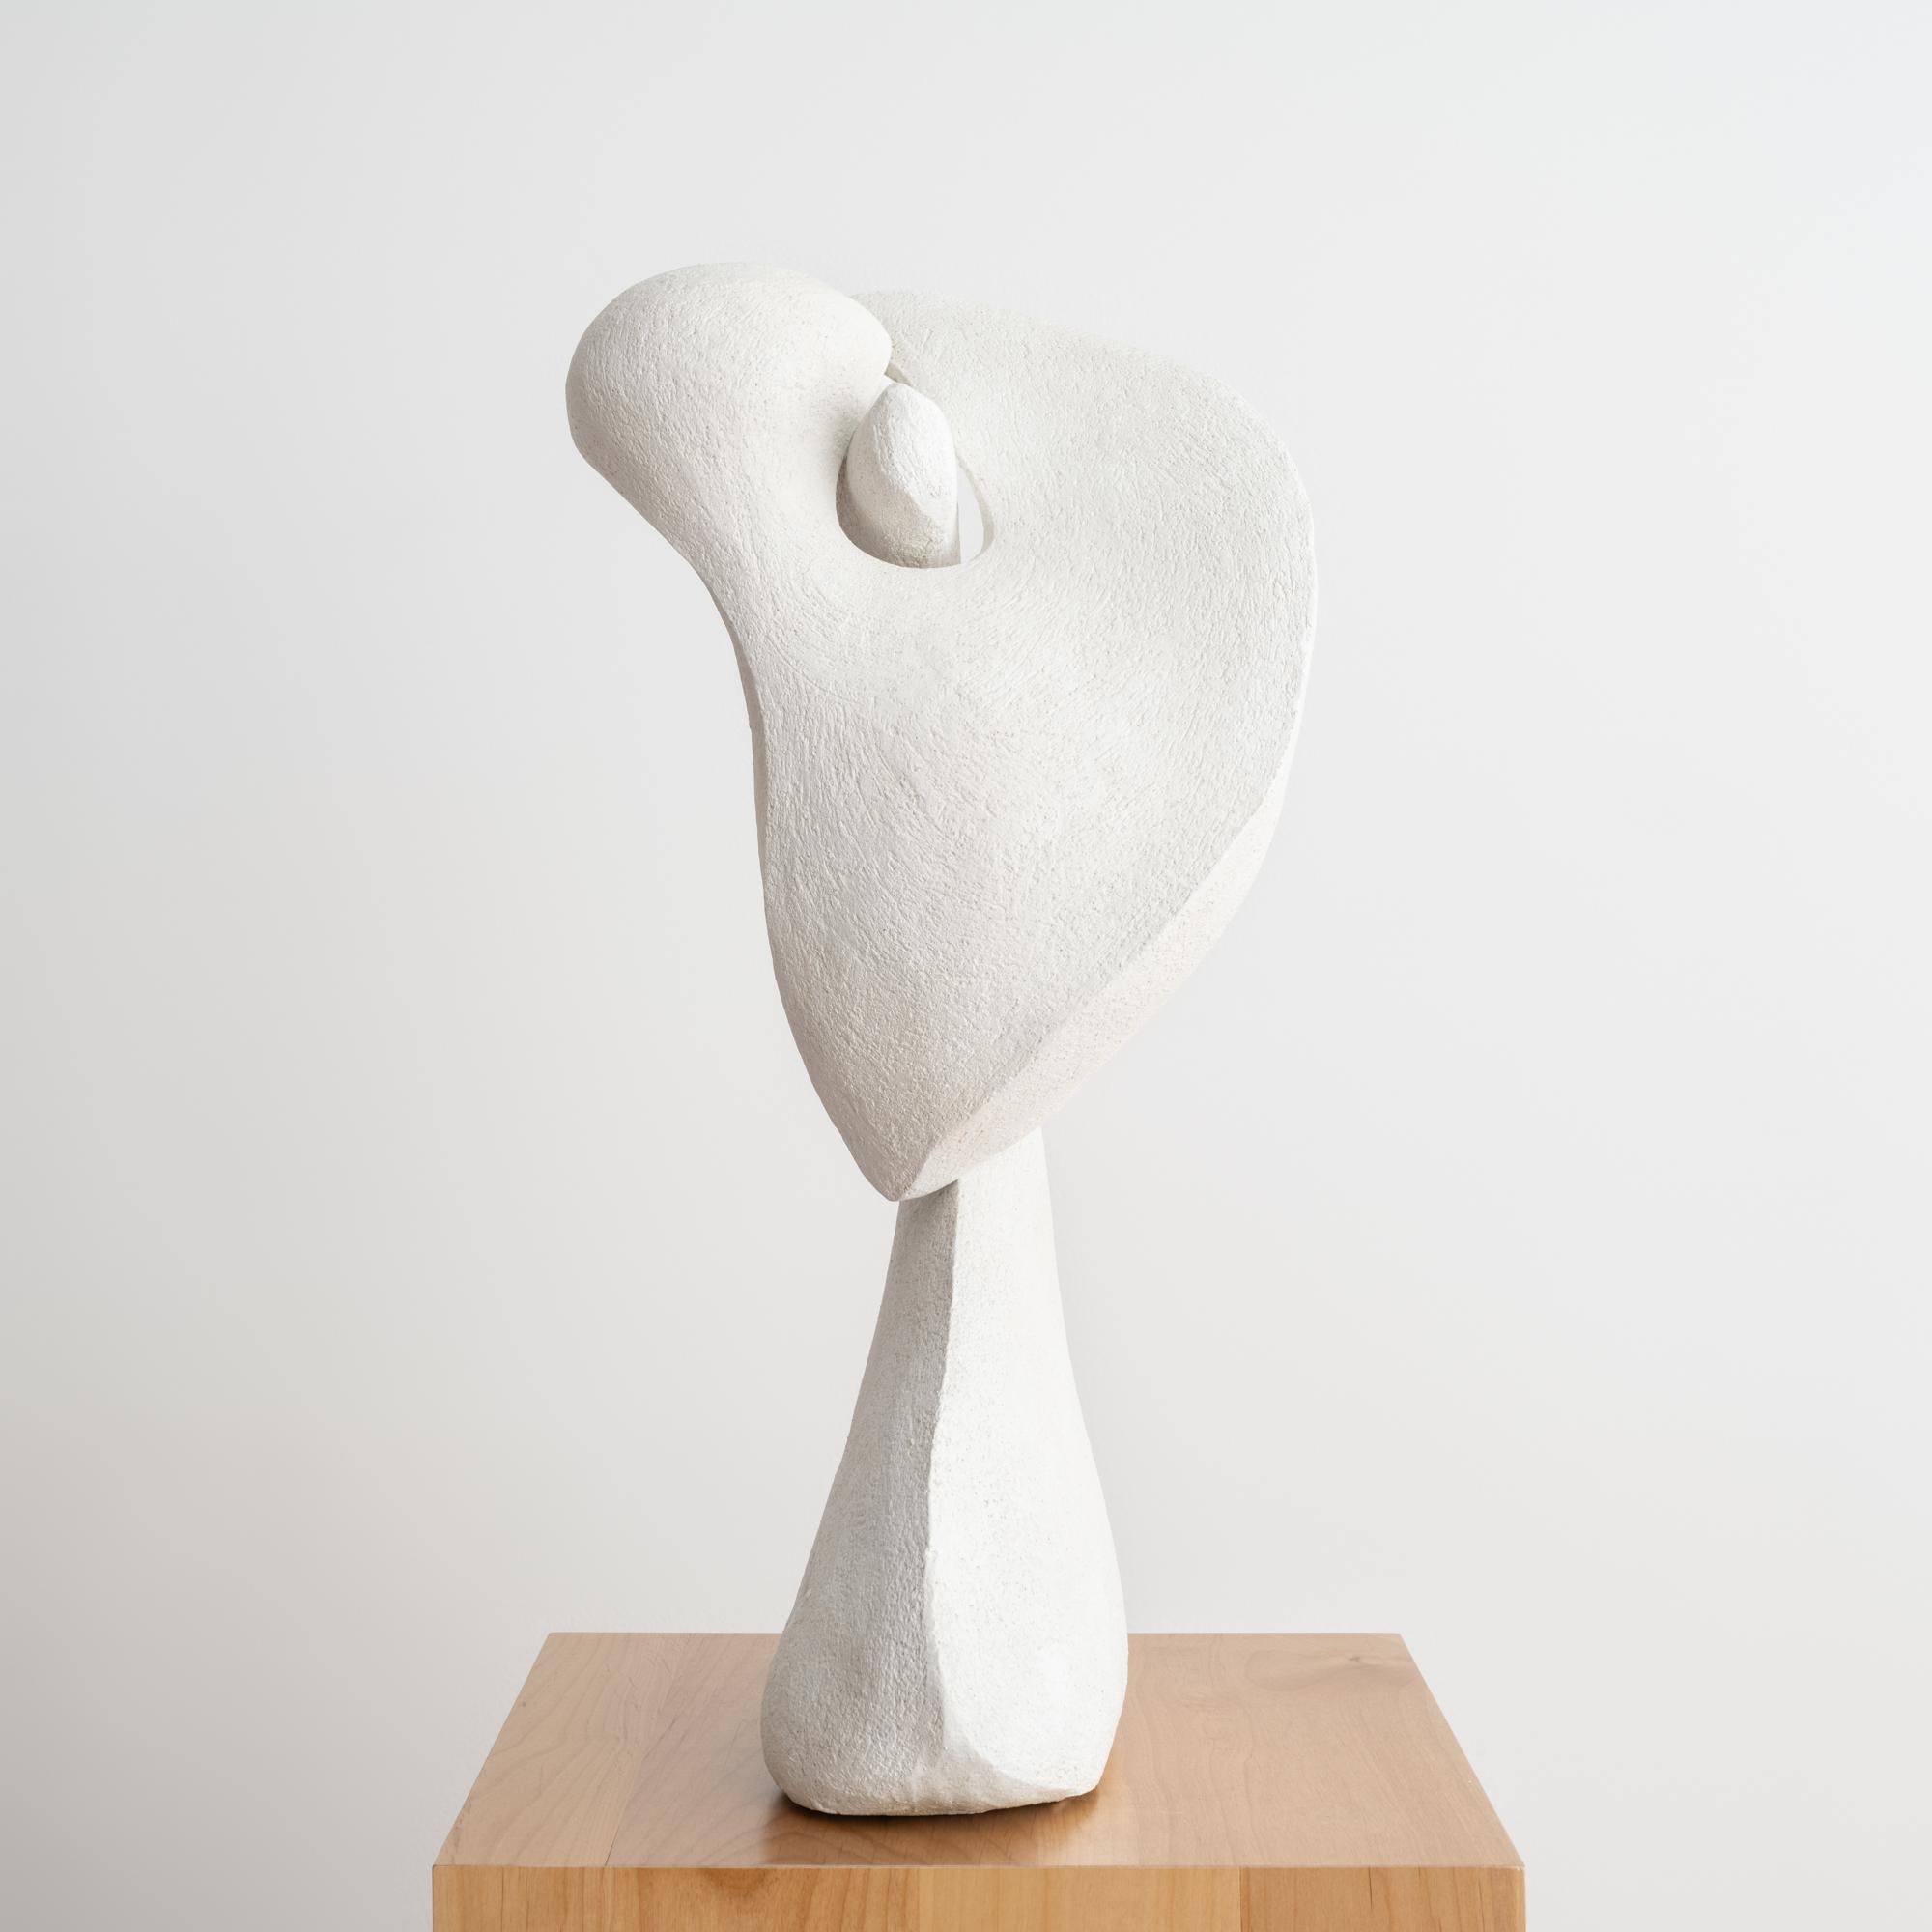 'Calla Lily' by Simone-Bodmer Turner is a contemporary white ceramic sculpture that gracefully blends the realms of biomorphism and abstraction.  Standing 24-inches tall, with a 12-inch diameter at its widest point and 6-inches at the base, this